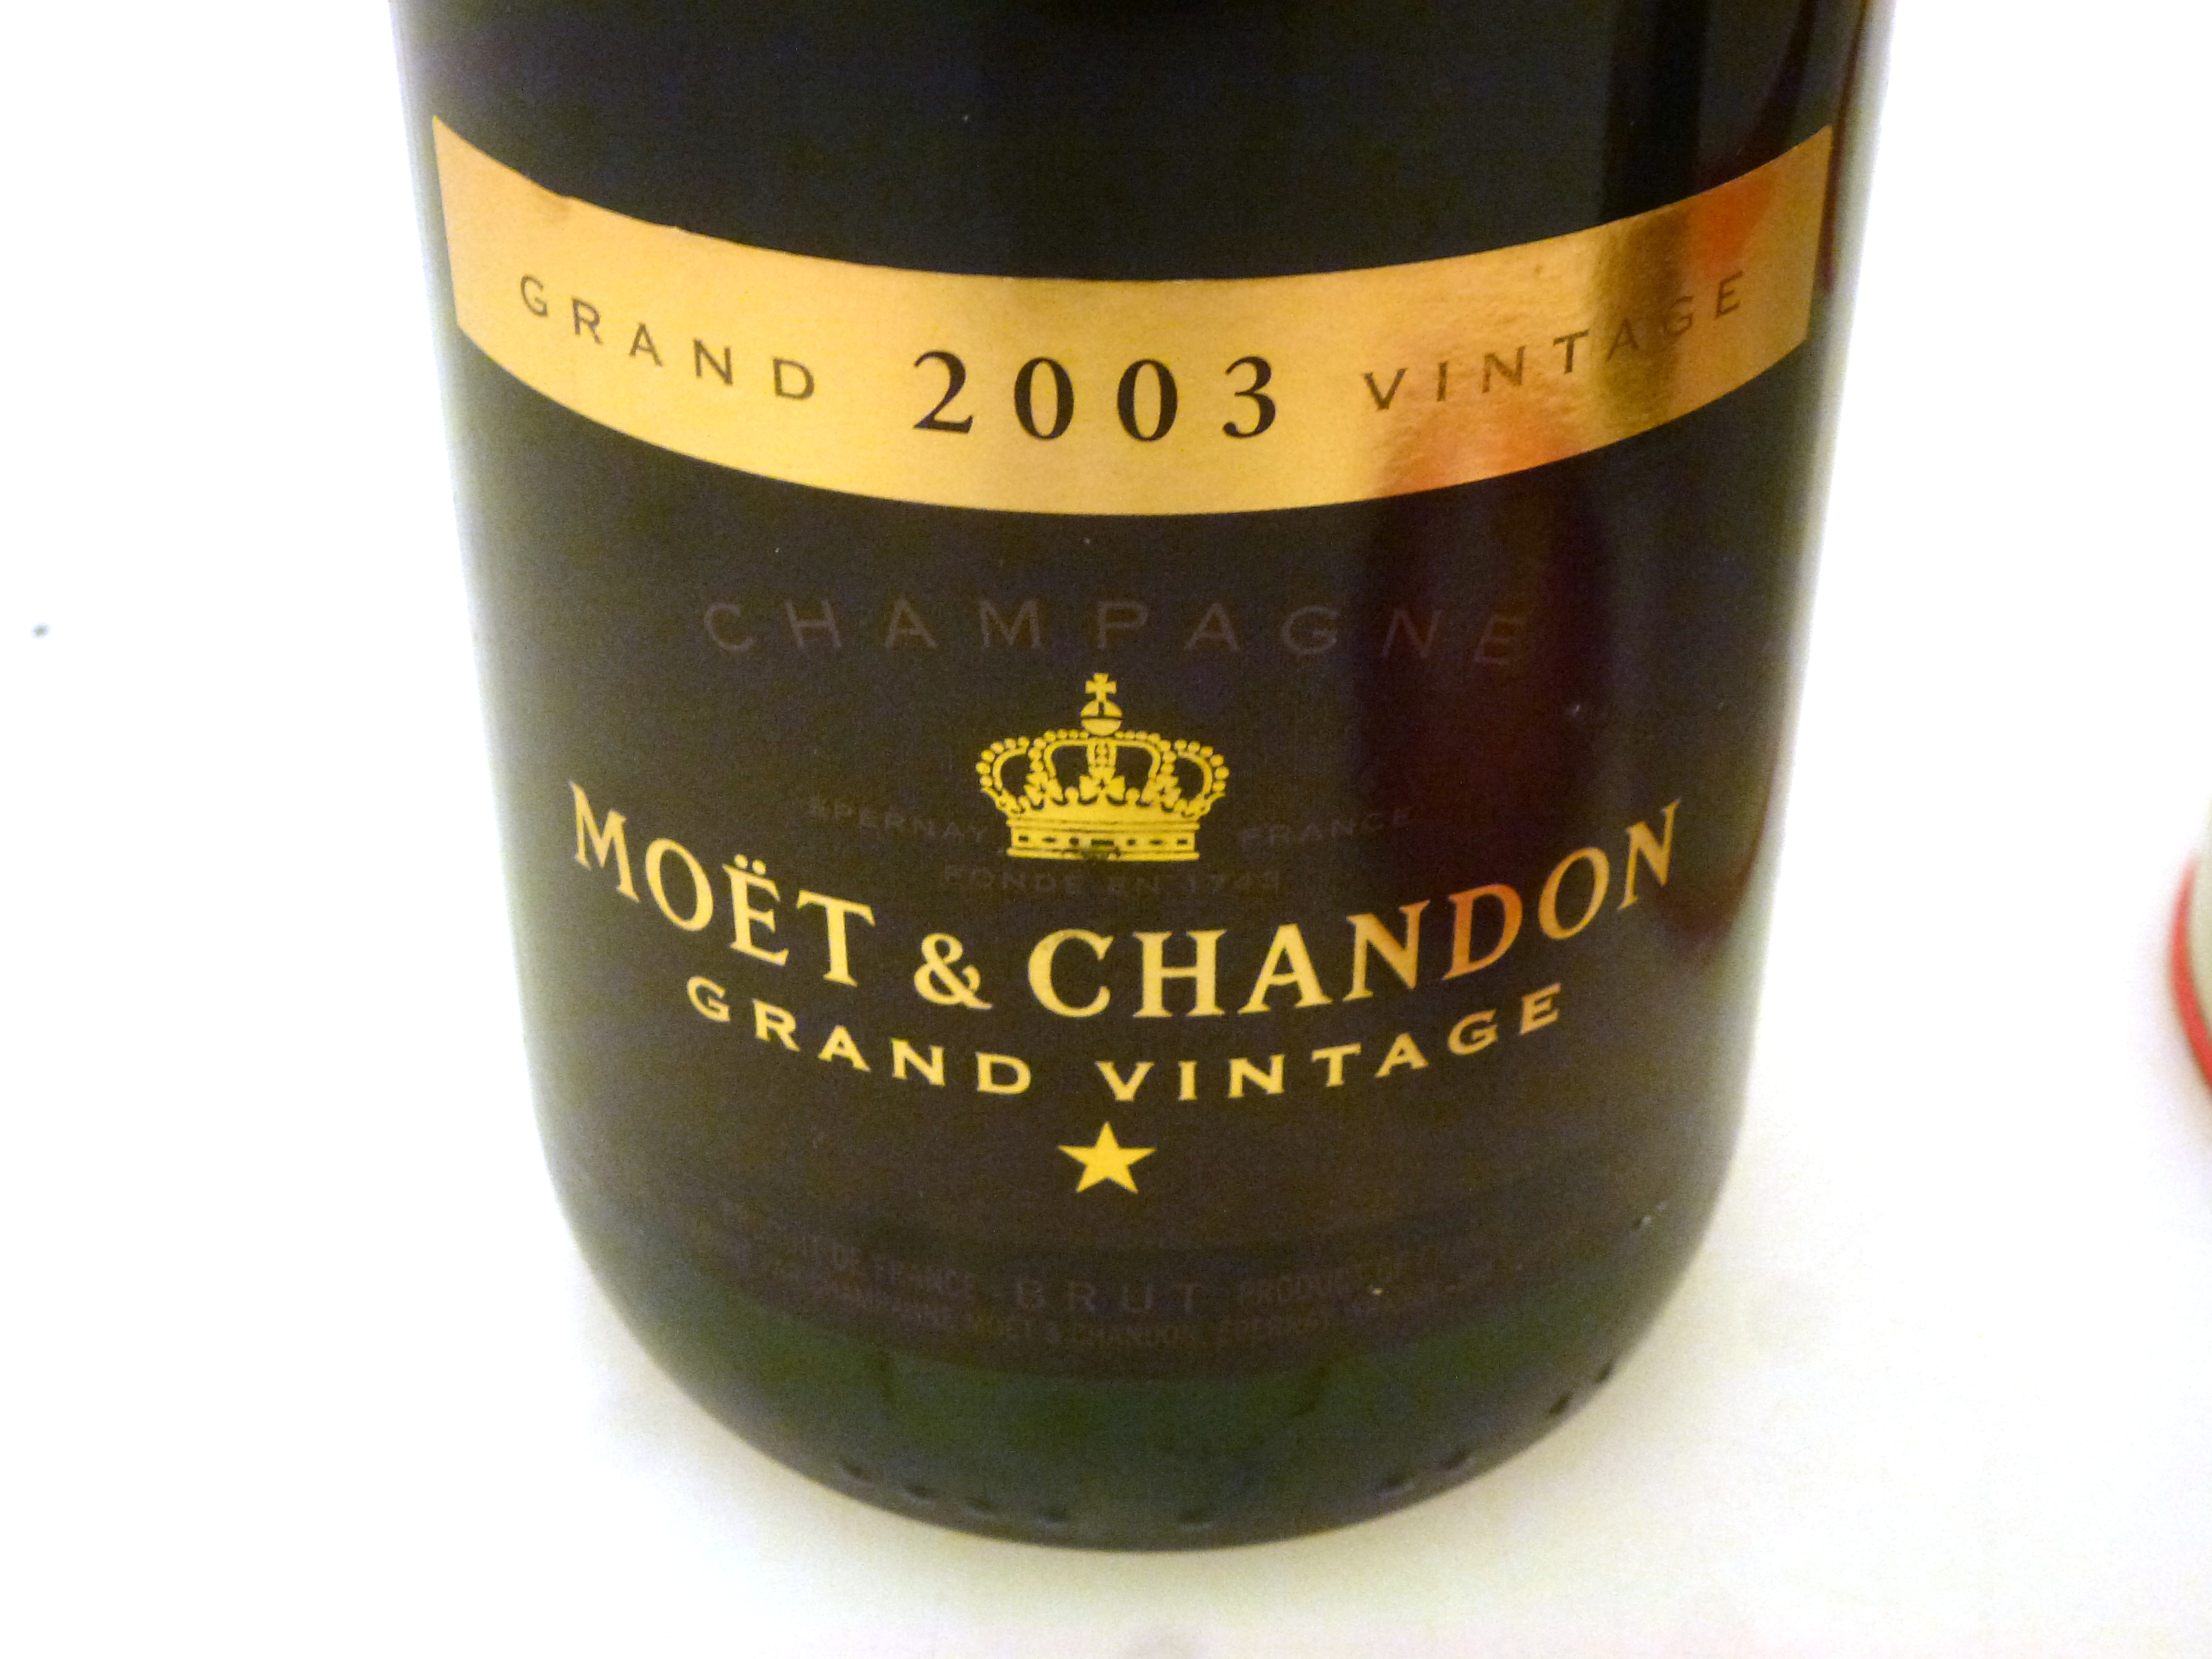 BOTTLE OF 2003 MOET AND CHANDON GRAND VINTAGE CHAMPAGNE AND A BOXED BOTTLE OF G.H. MUMM AND CIE - Image 5 of 7